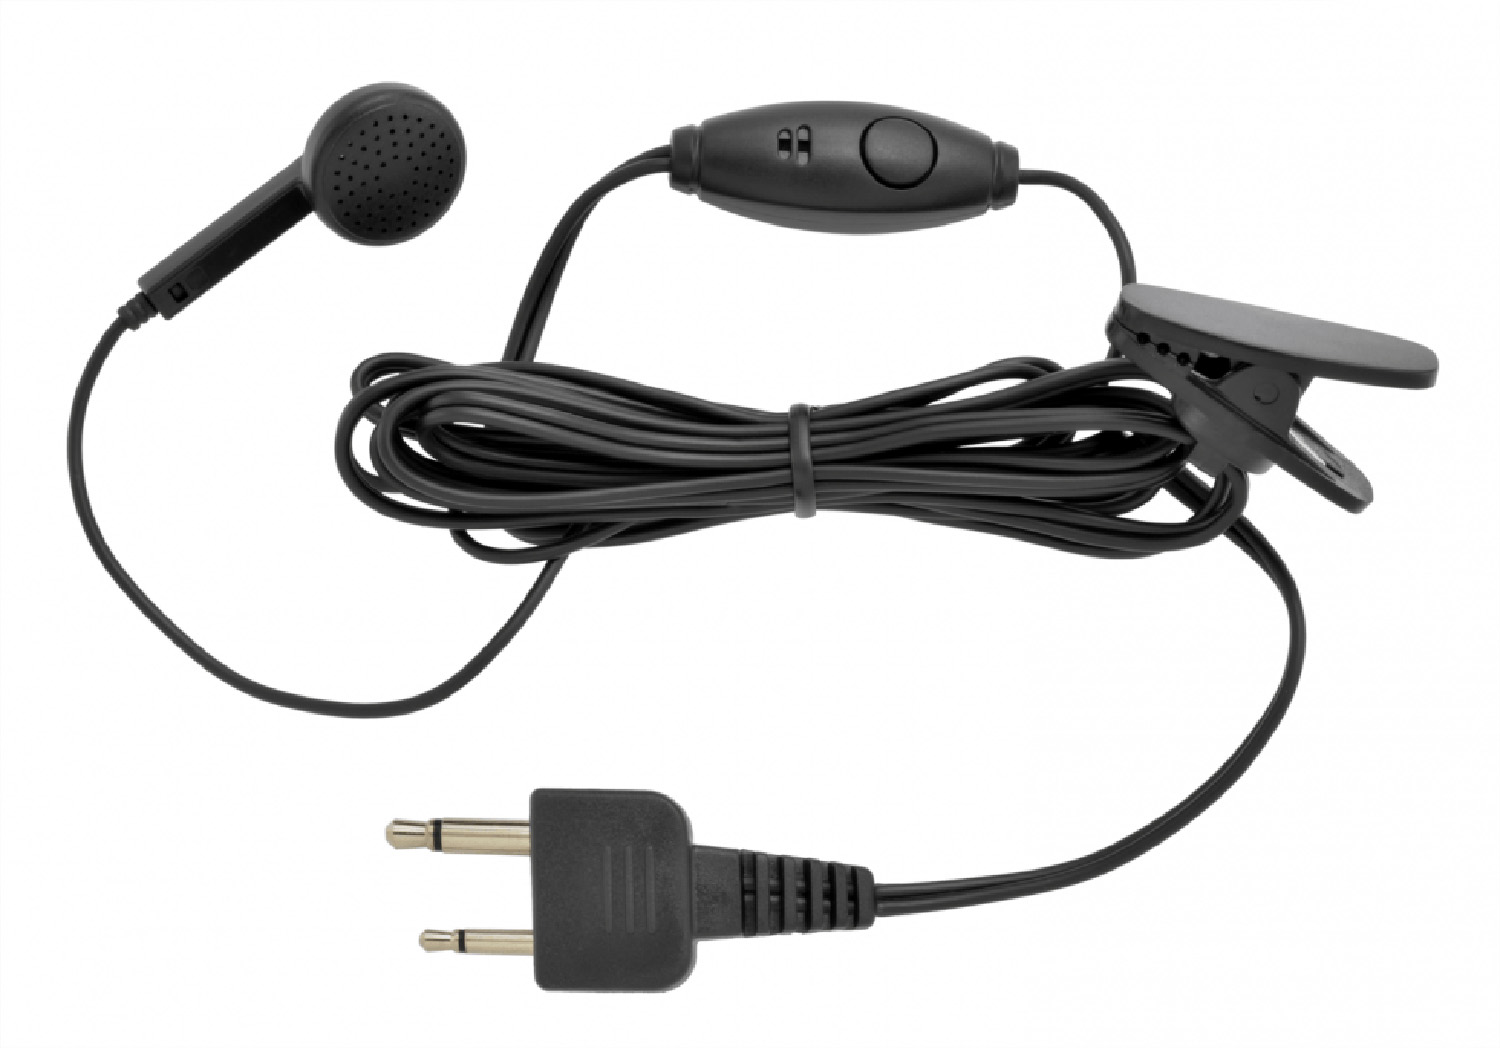 Cobra - PMREBM Ear Bud Microphone For The Hh38Wxst & Hh50Wxst